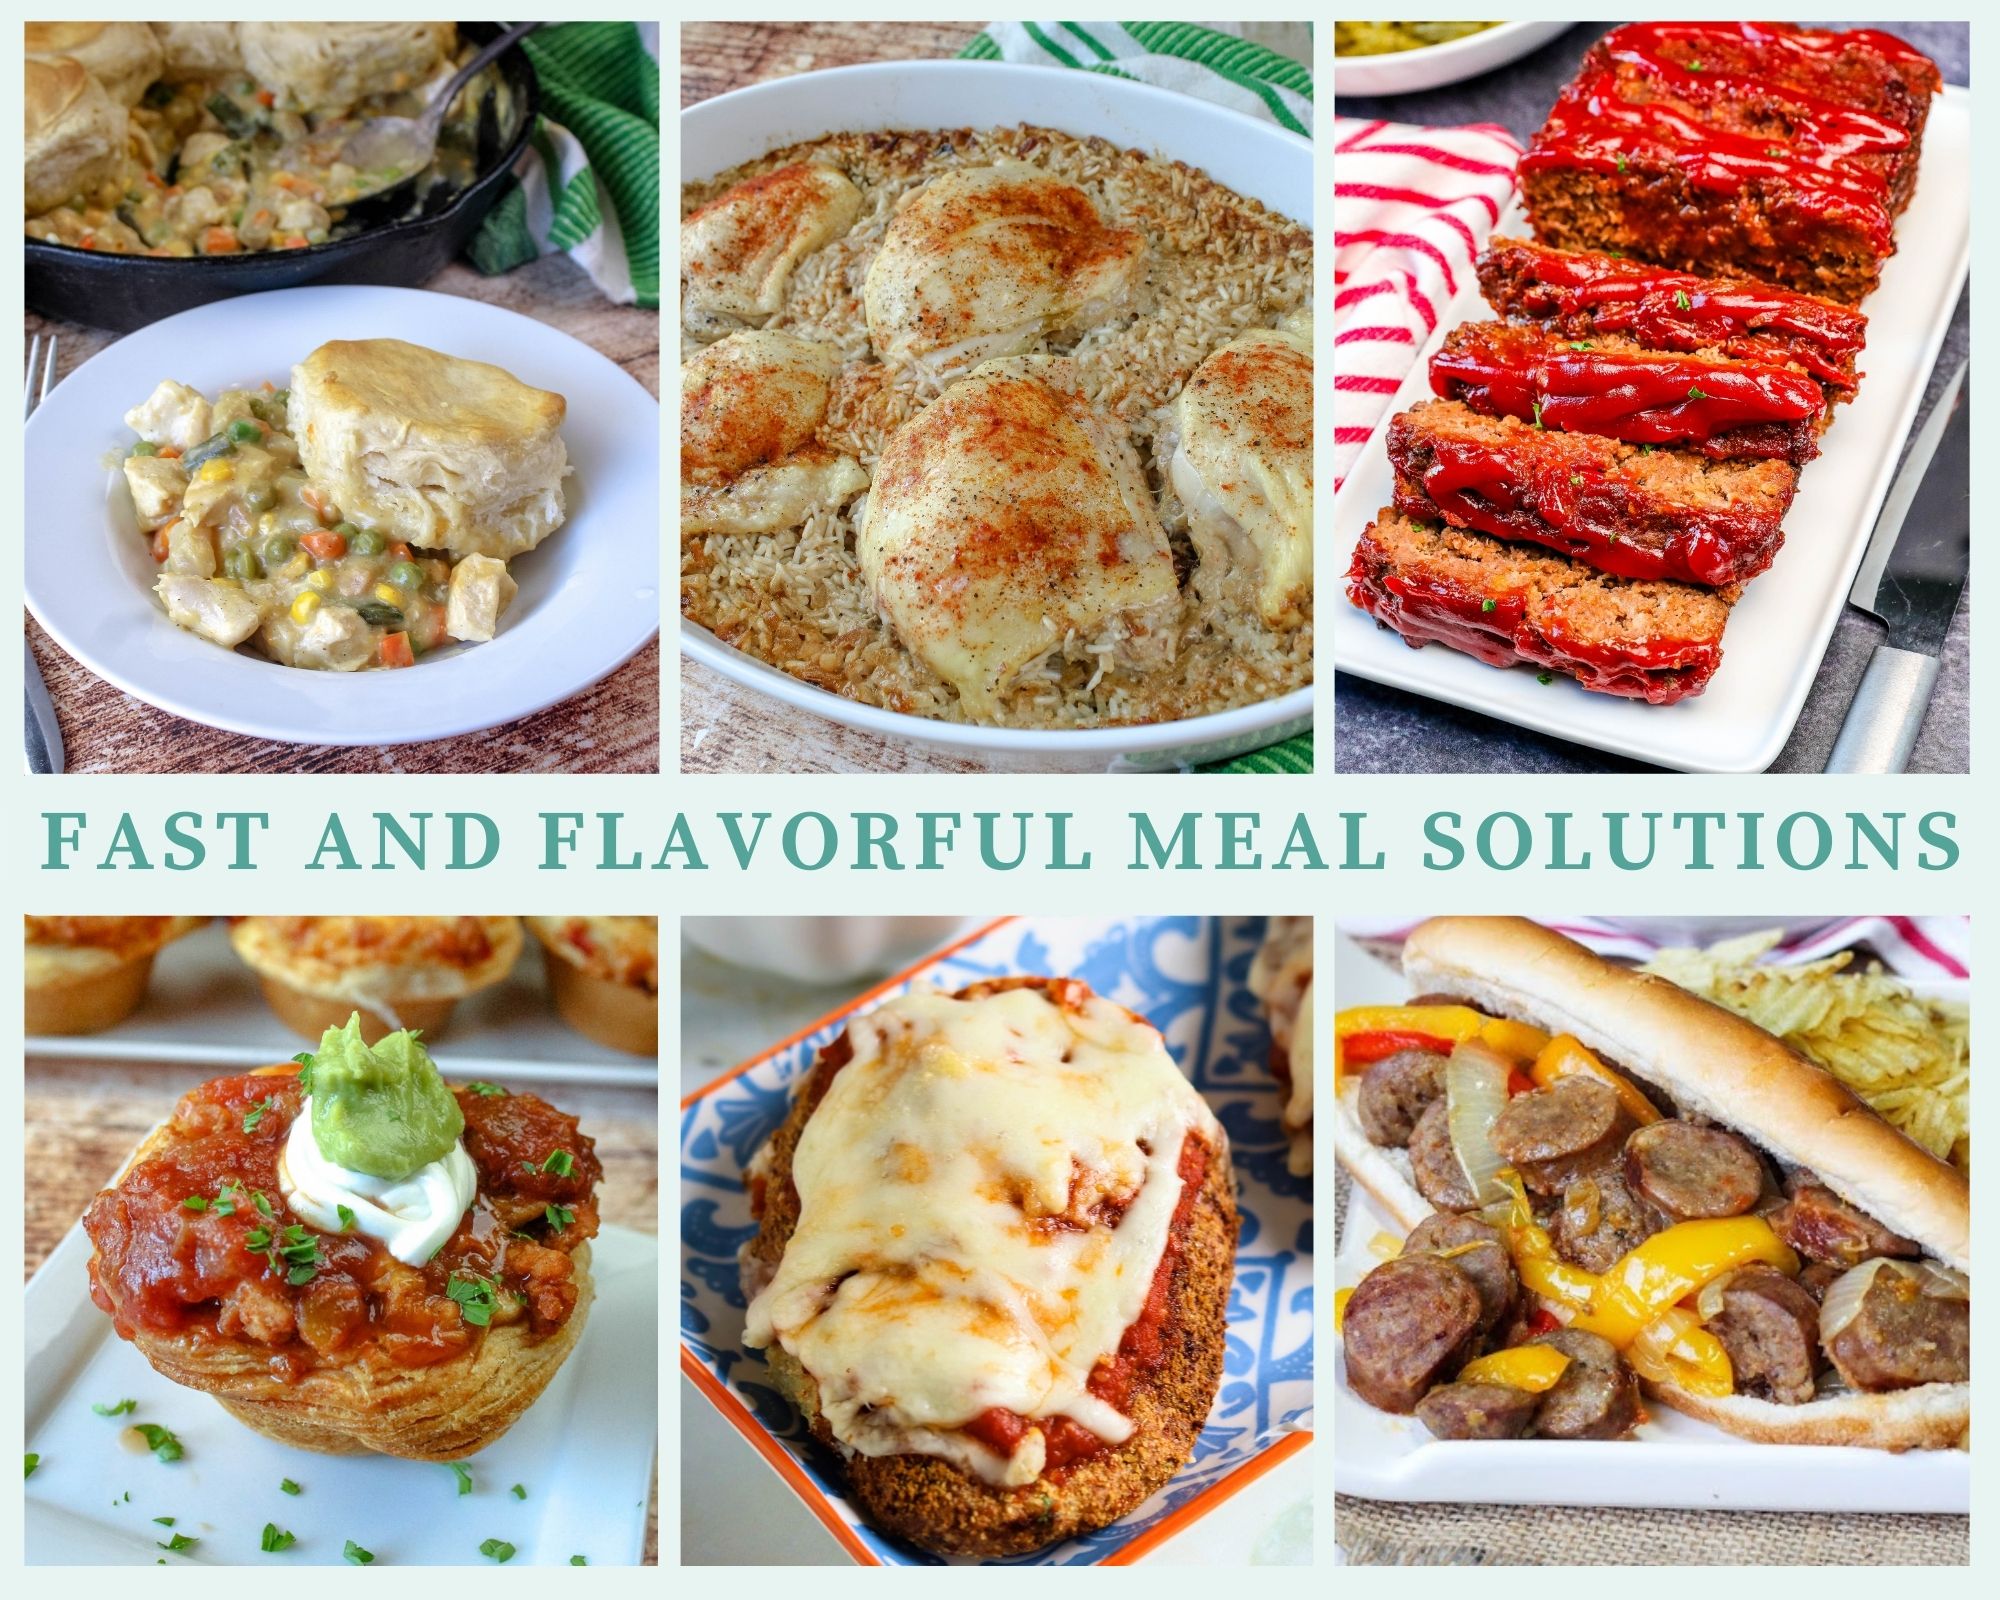 Fast and Flavorful Meal Solutions